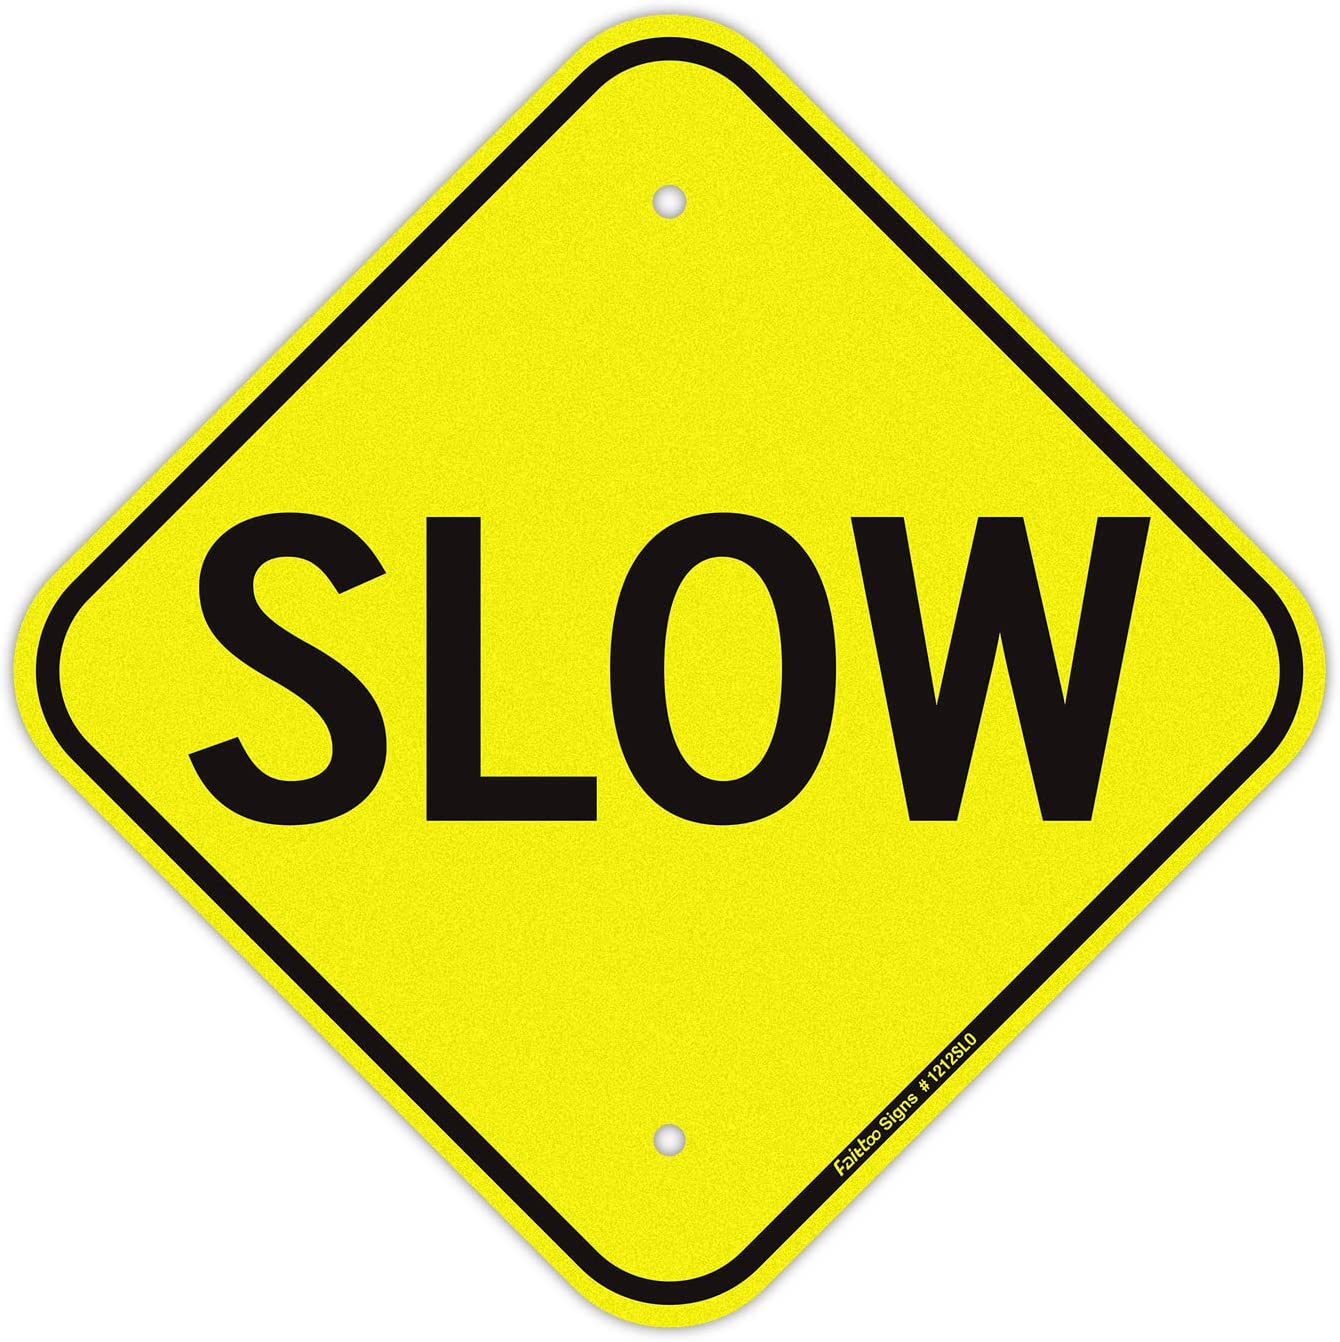 Slow Sign, 12 x 12 Inch Reflective Rust Free Aluminum Traffic Sign, UV Protected, Weather/Fade Resistant, Easy to Install and Read, Indoor/ Outdoors Use